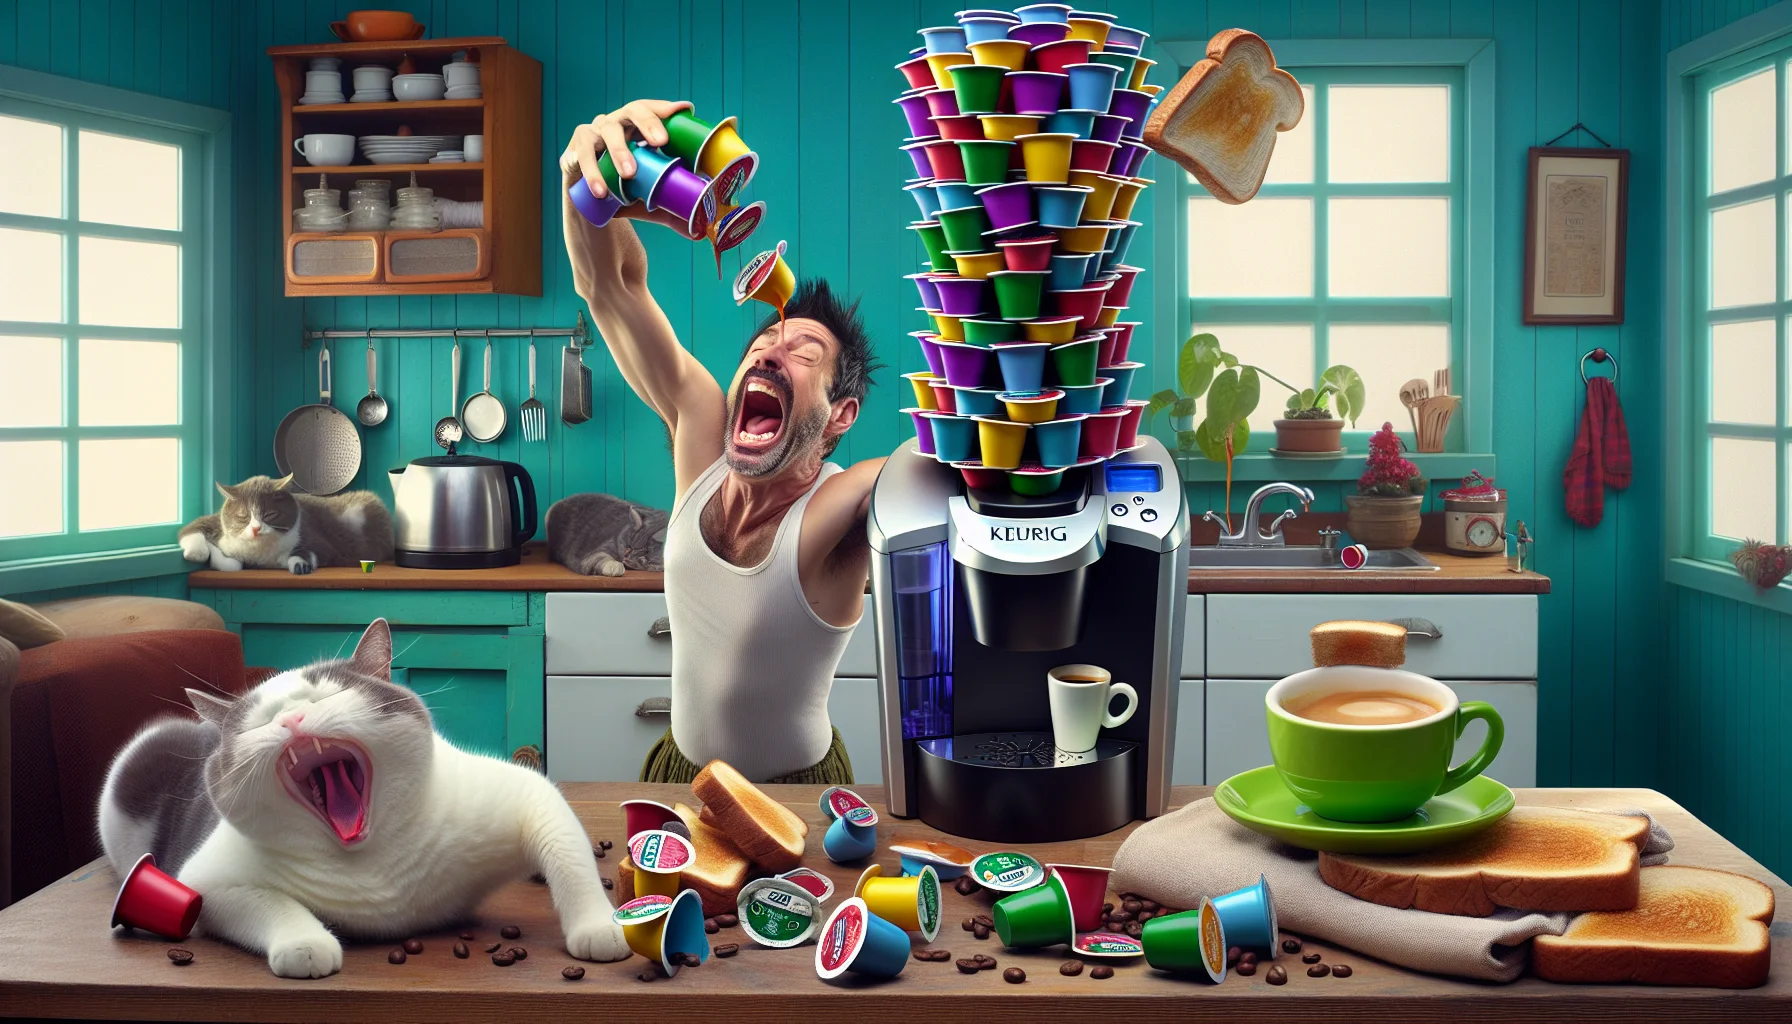 Imagine a humorous yet enticing scenario where a caucasian male is struggling to balance an impossibly tall stack of multicoloured espresso pods for a Keurig coffee machine in one hand, while the other hand attempts to steady a lopsided cup of espresso. The setting is a quirky kitchen with retrod design. The background is filled with laughter-provoking elements like a snoring cat sprawled on the countertop, a piece of toast flying out of a toaster, and a vibrant green potted plant that has grown way out of its pot.